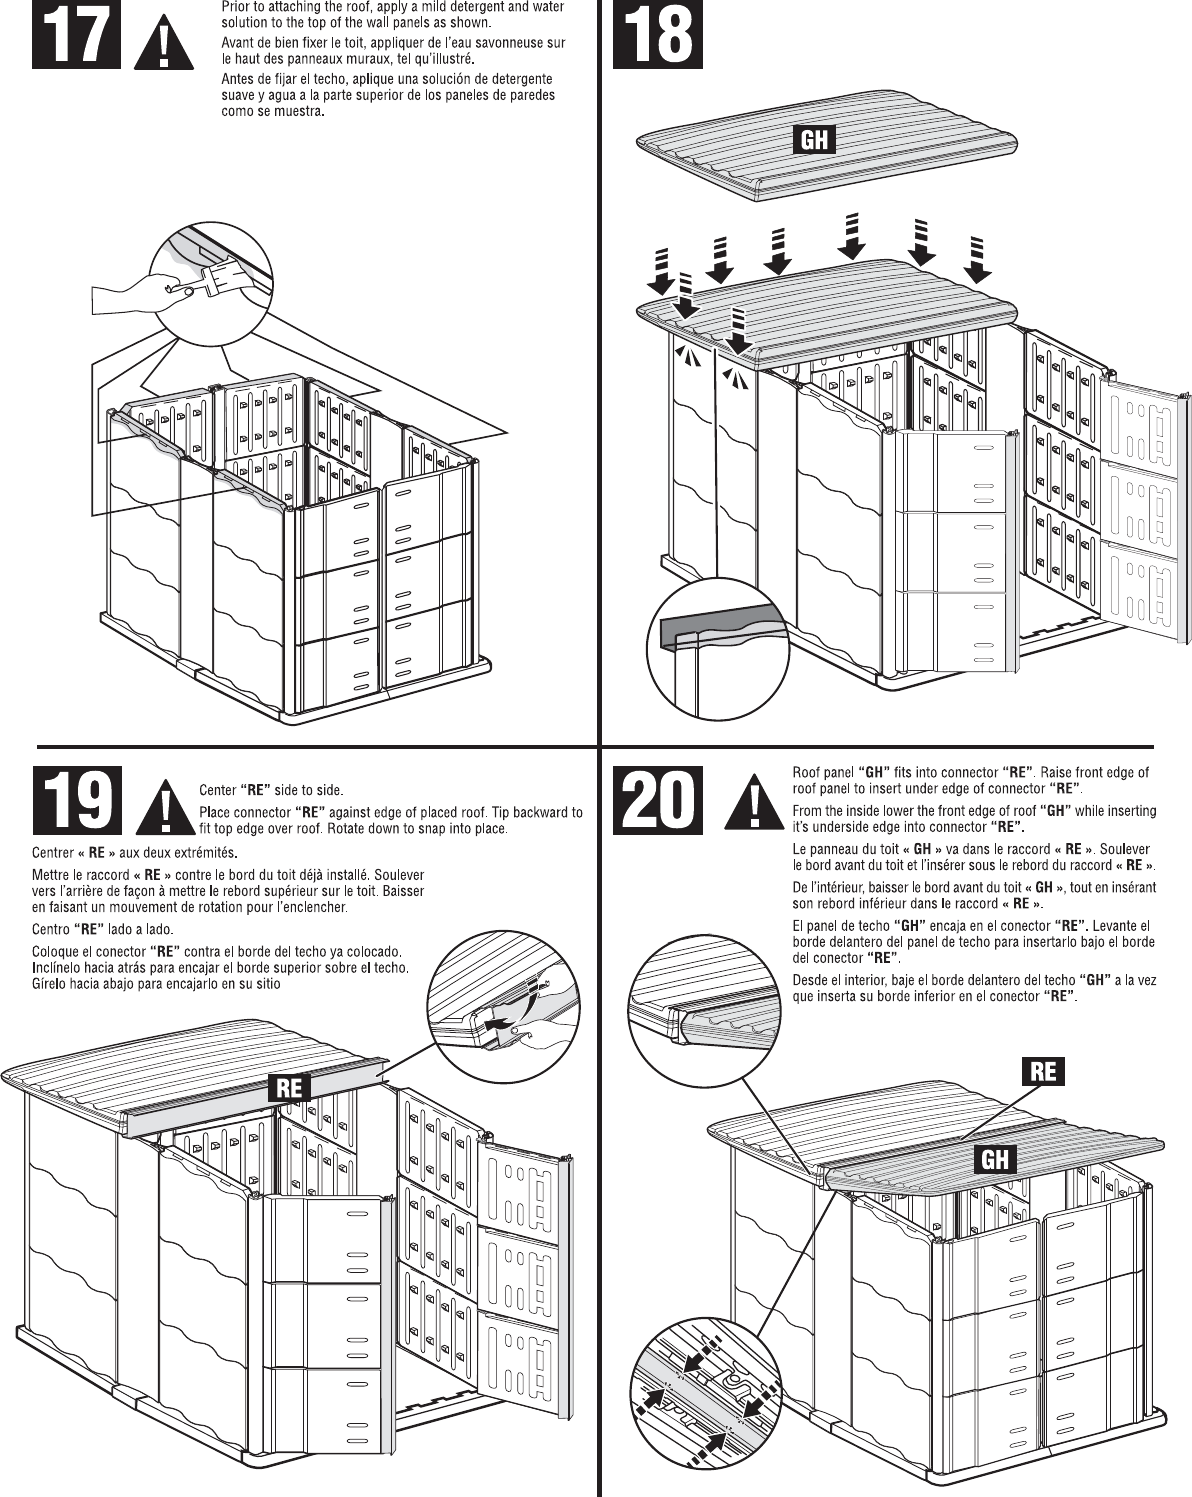 Page 6 of 8 - Rubbermaid Rubbermaid-Outdoor-Storage-3673-Users-Manual- 3673 Assembly  Rubbermaid-outdoor-storage-3673-users-manual